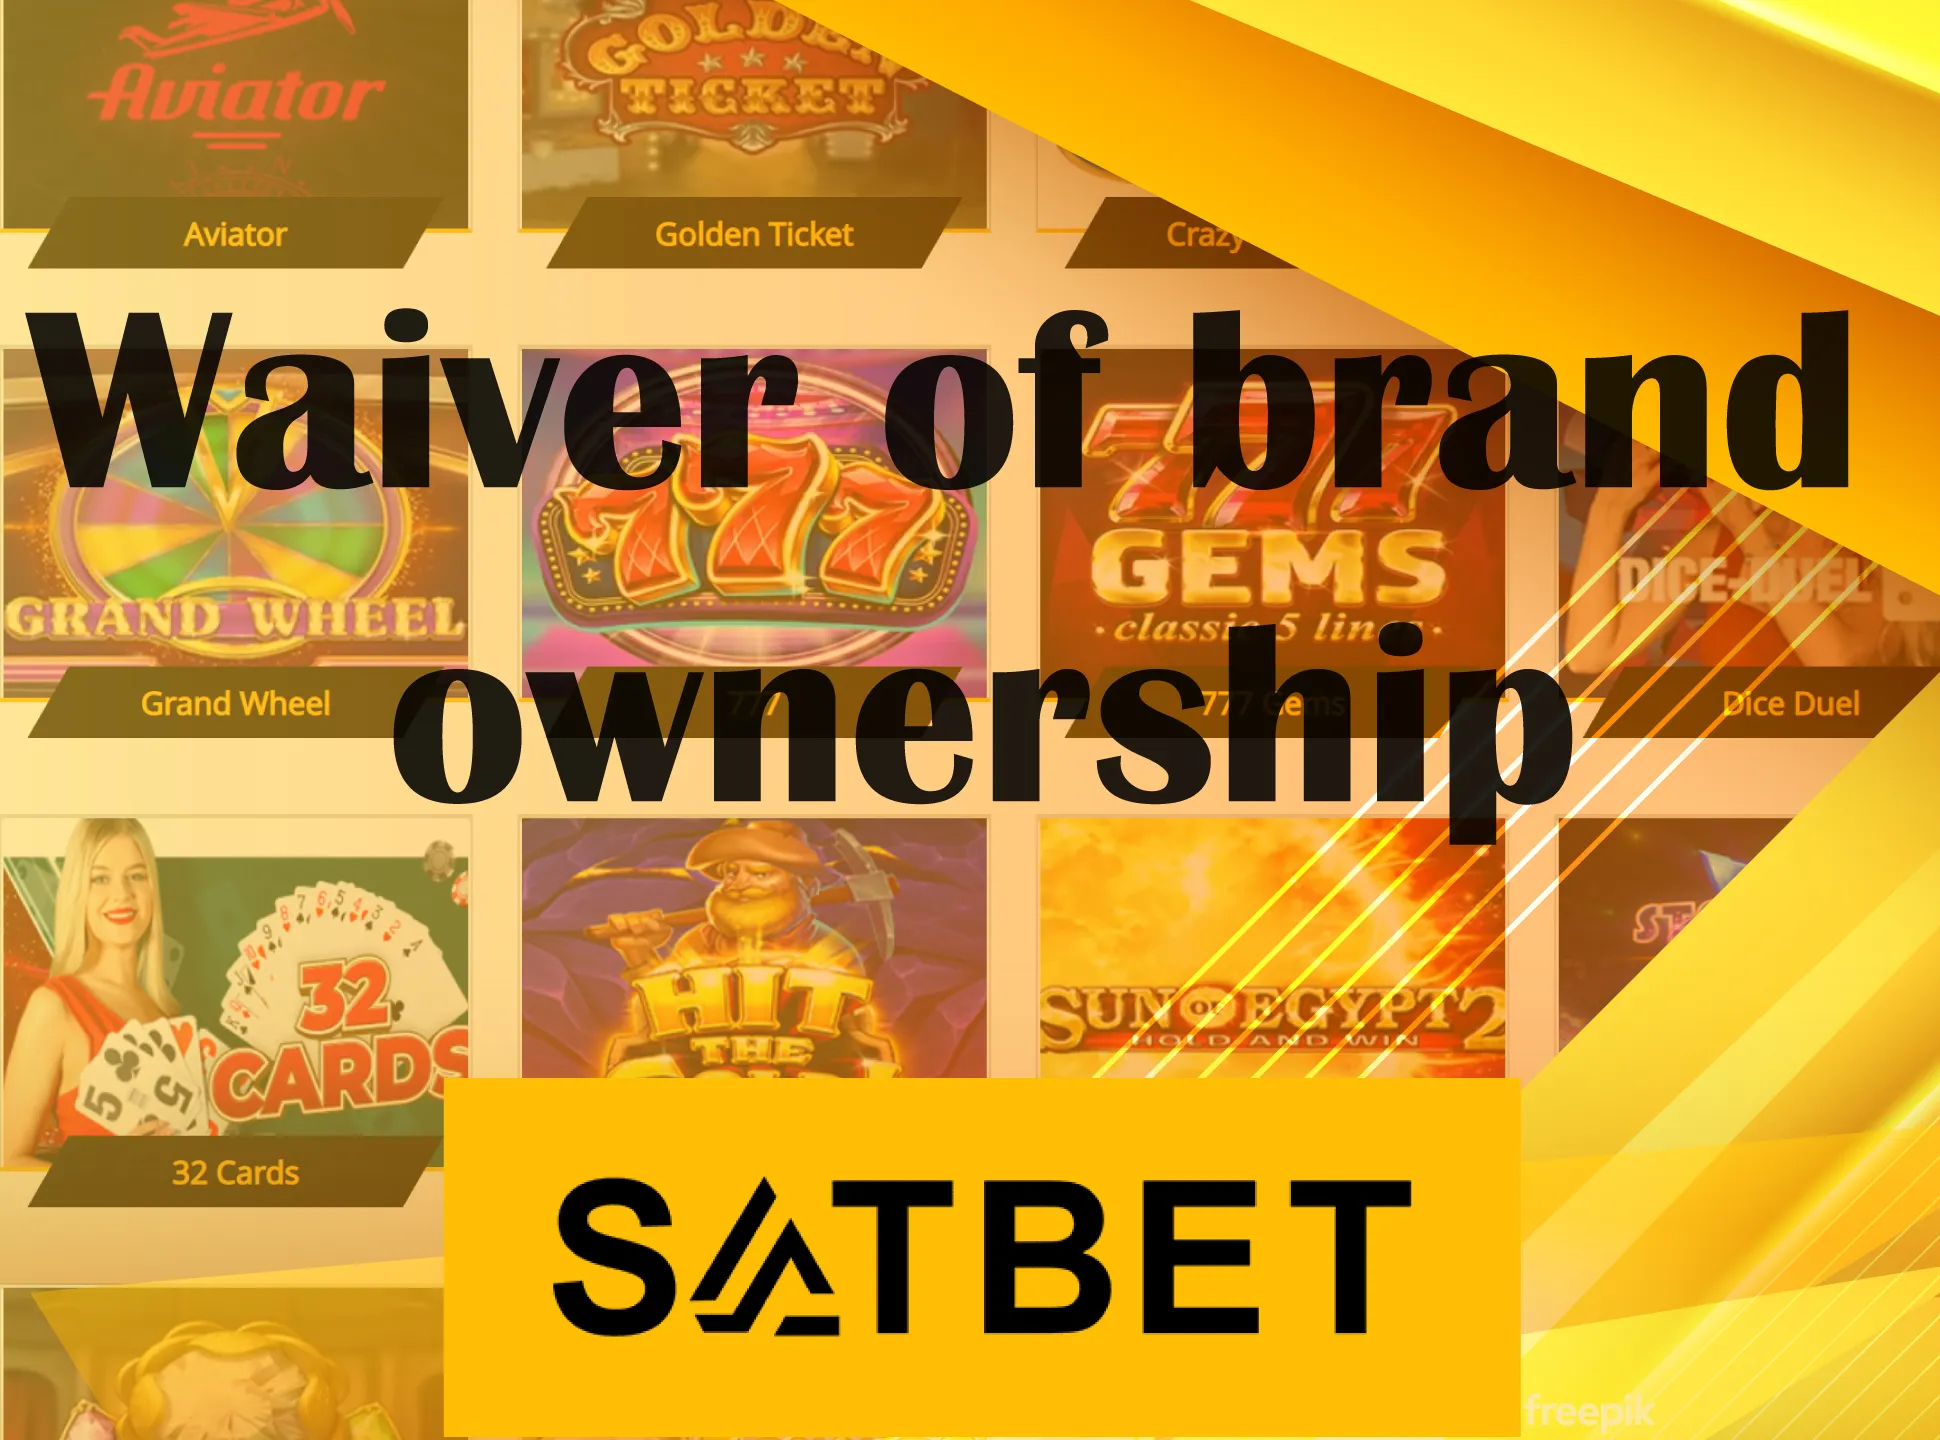 Satbet has all of their brand ownerships.